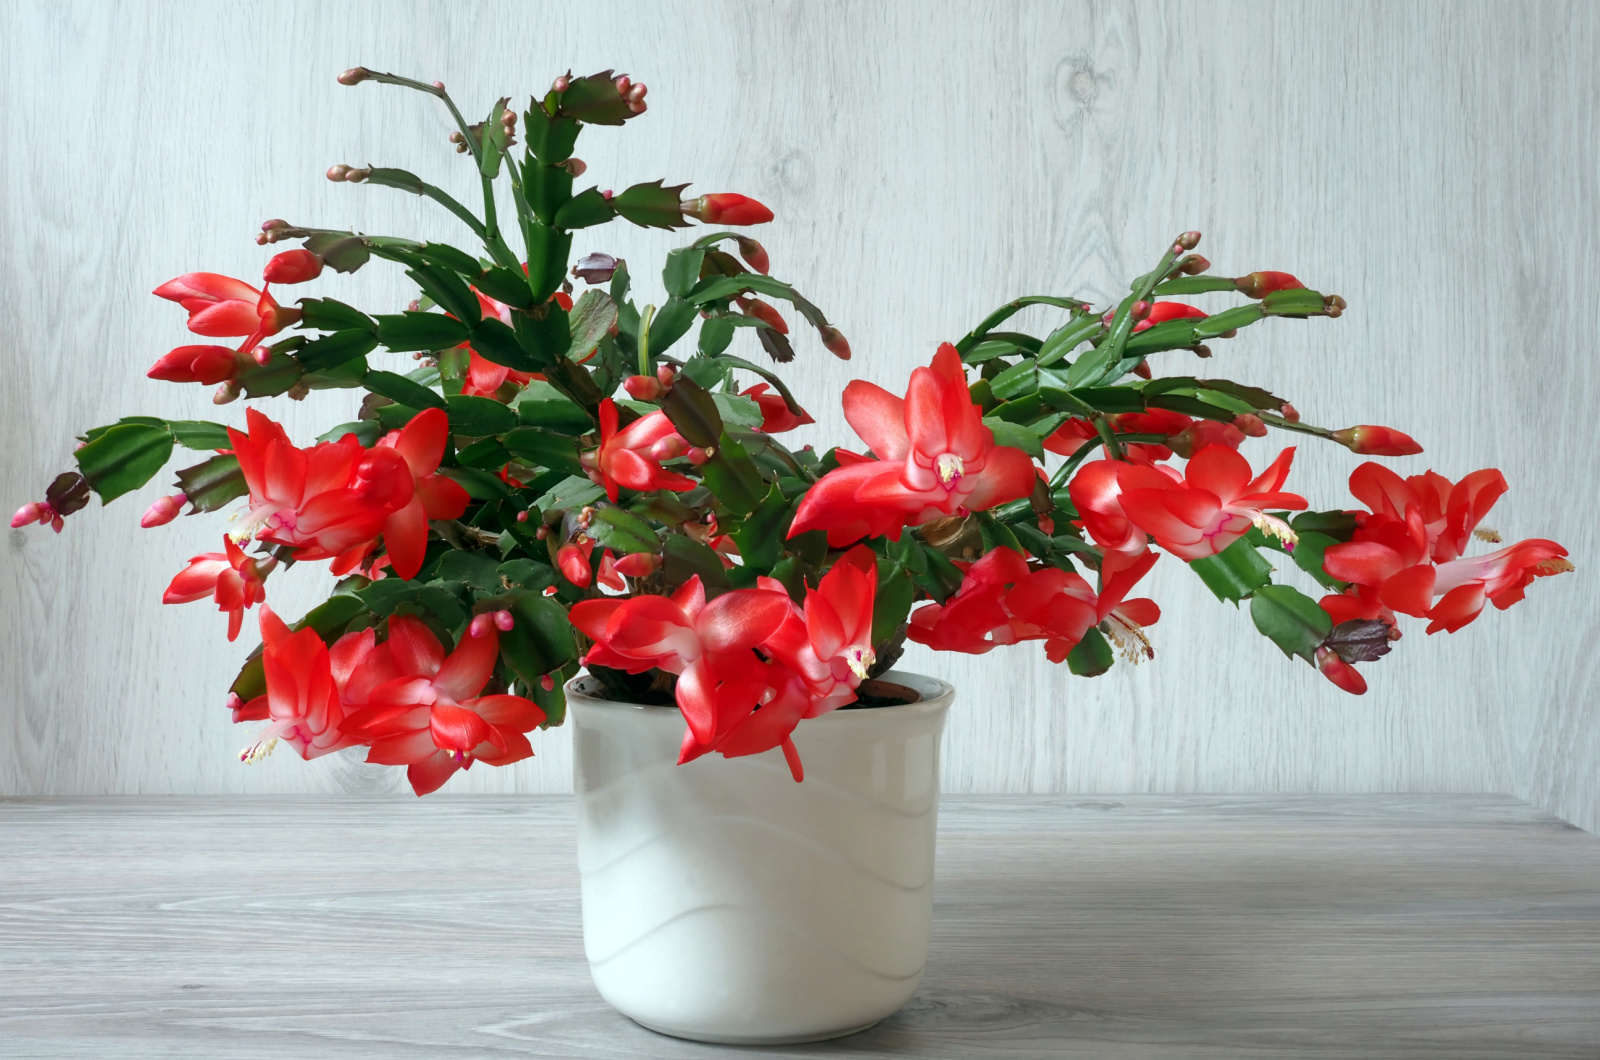 Christmas cactus in a white pot